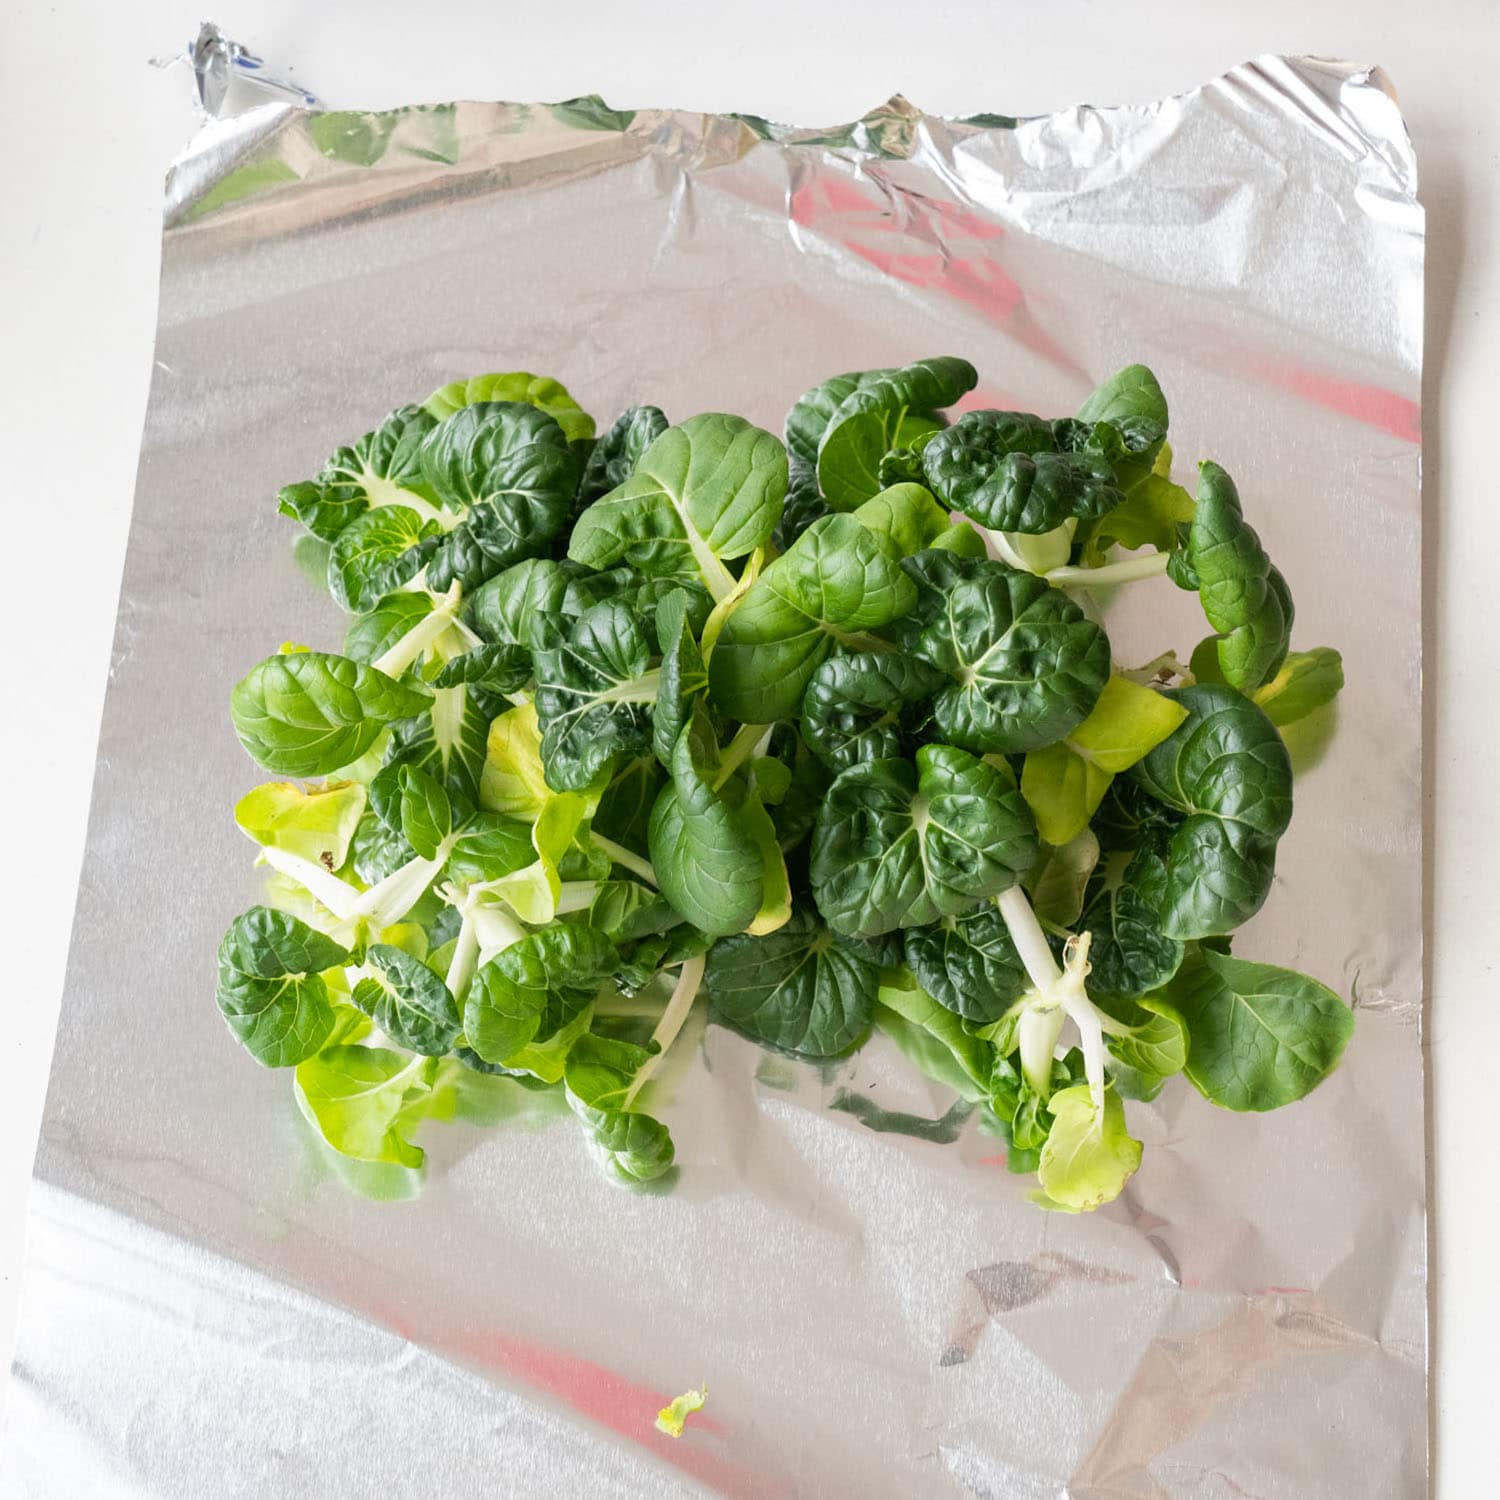 How To Store Baby Bok Choy